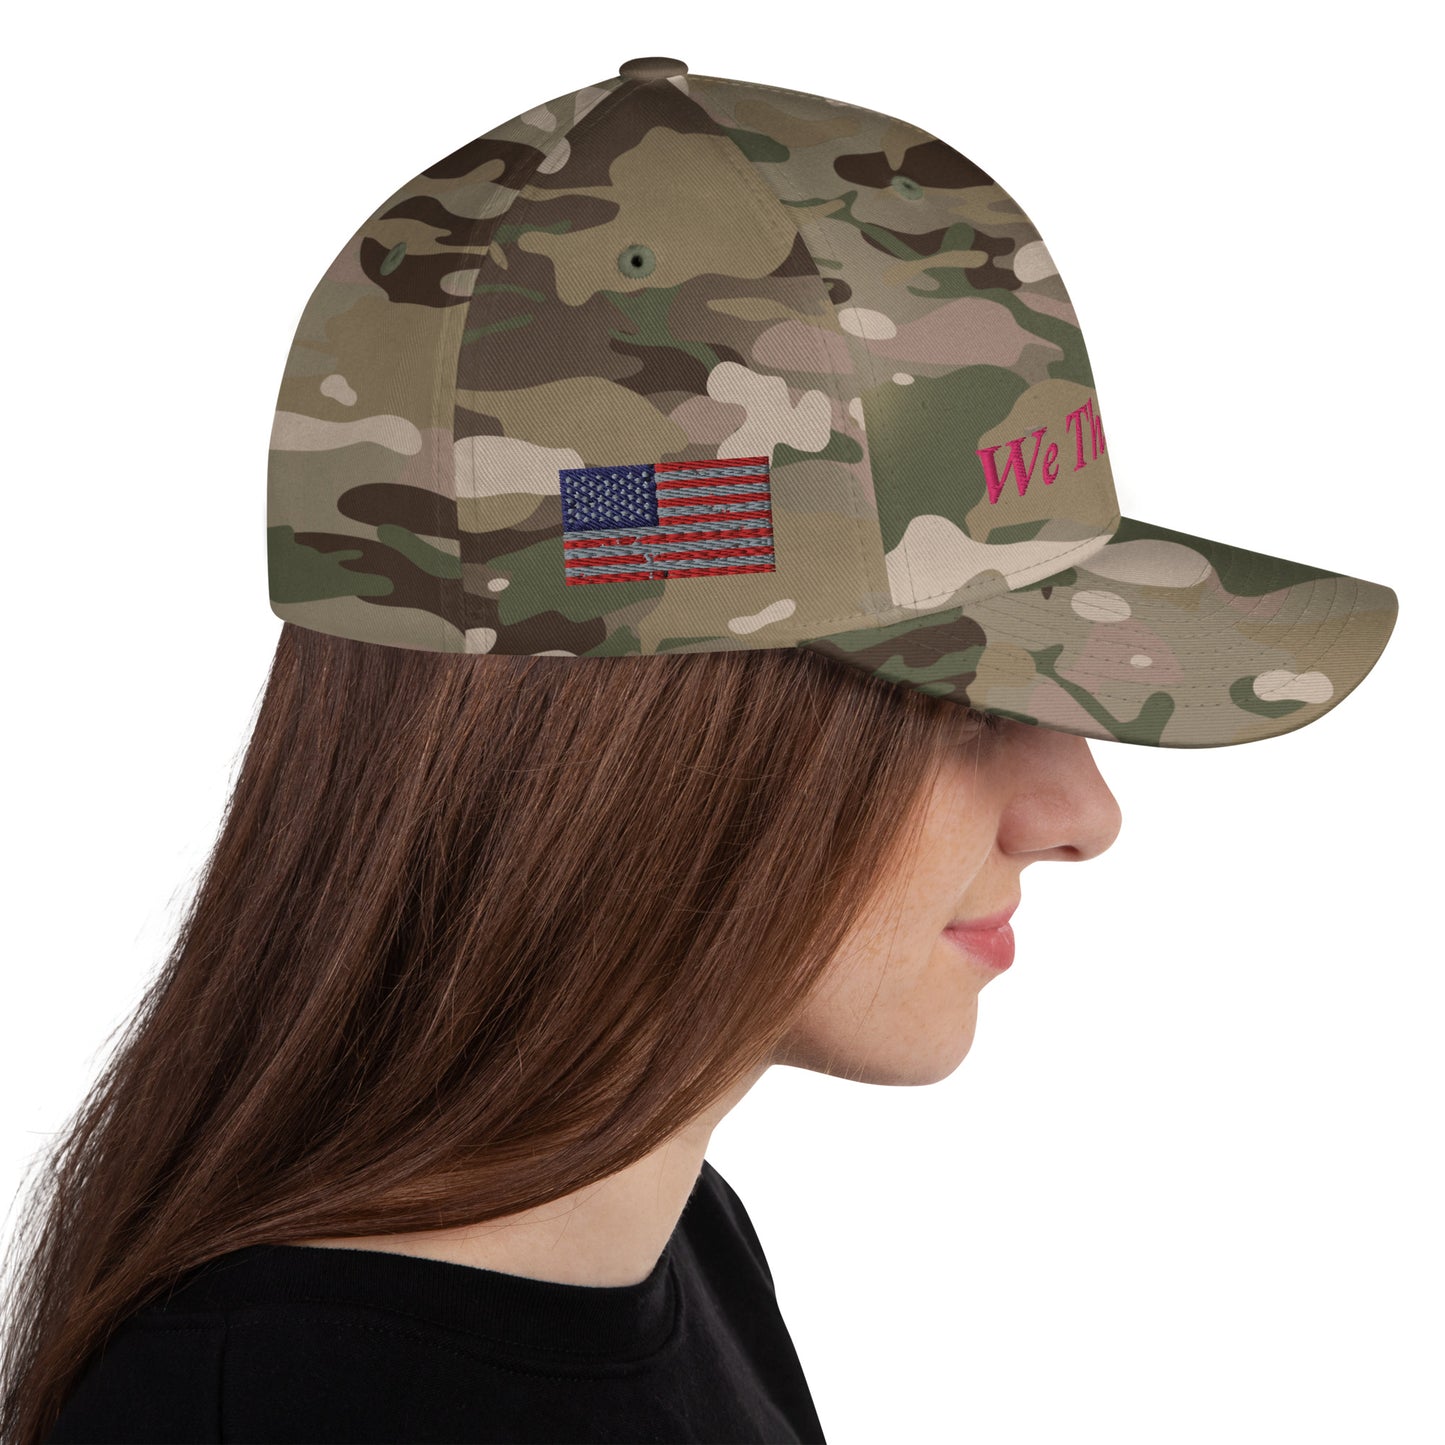 We The People Structured Twill Cap